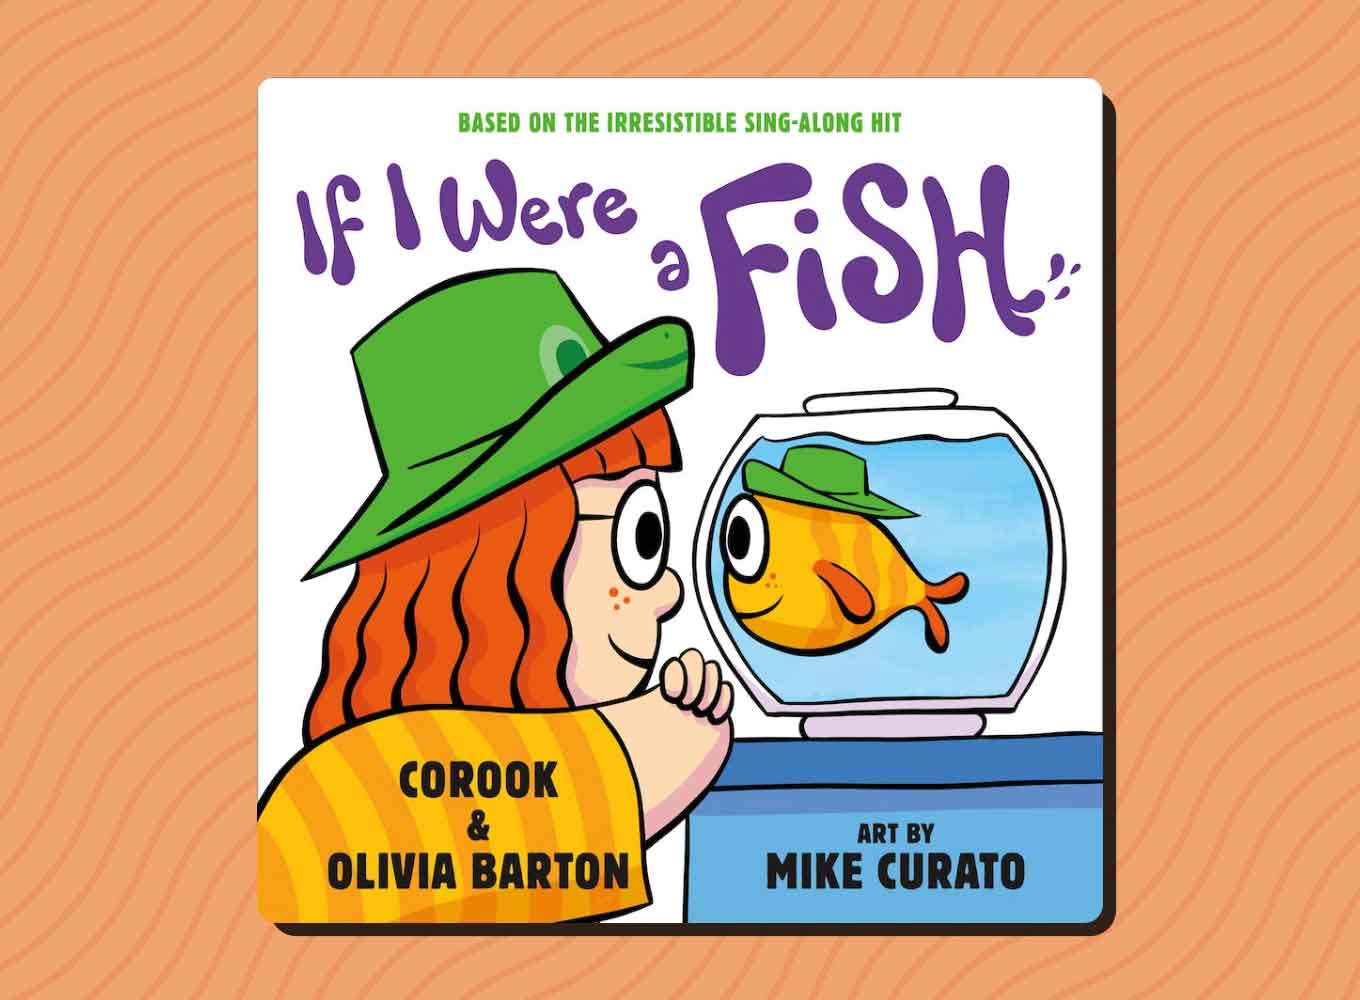 "If I Were A Fish" by Corook and Olivia Barton, illustrated by Mike Curato